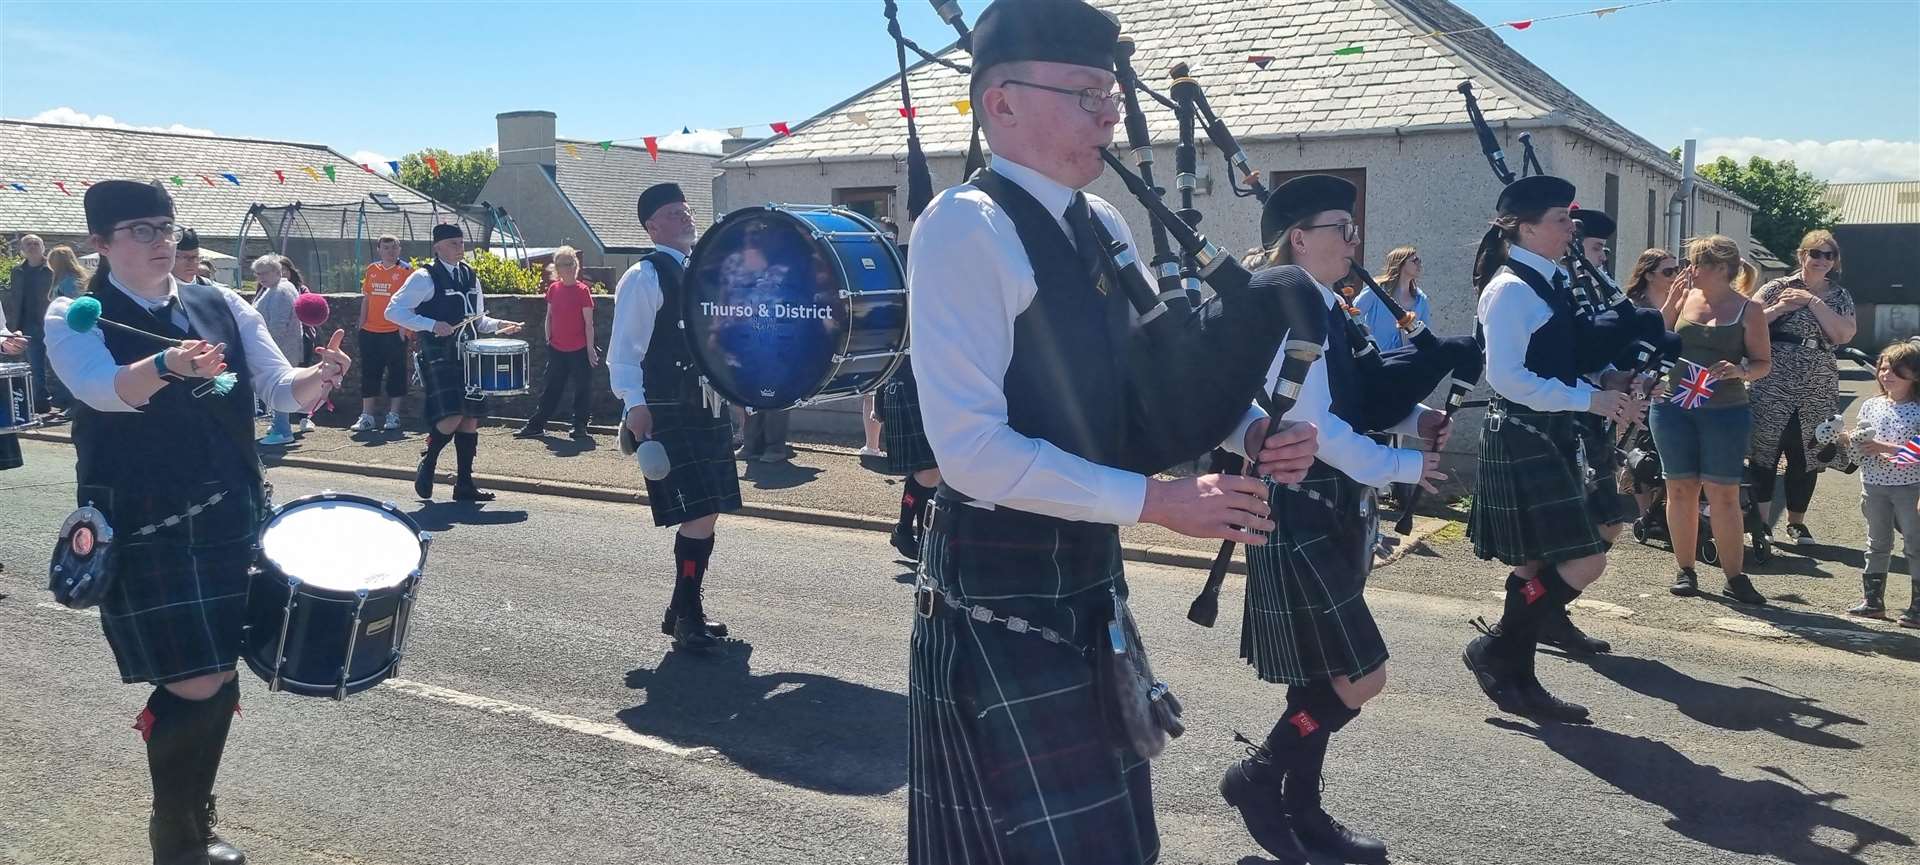 Thurso Pipe Band played at the jubilee event.